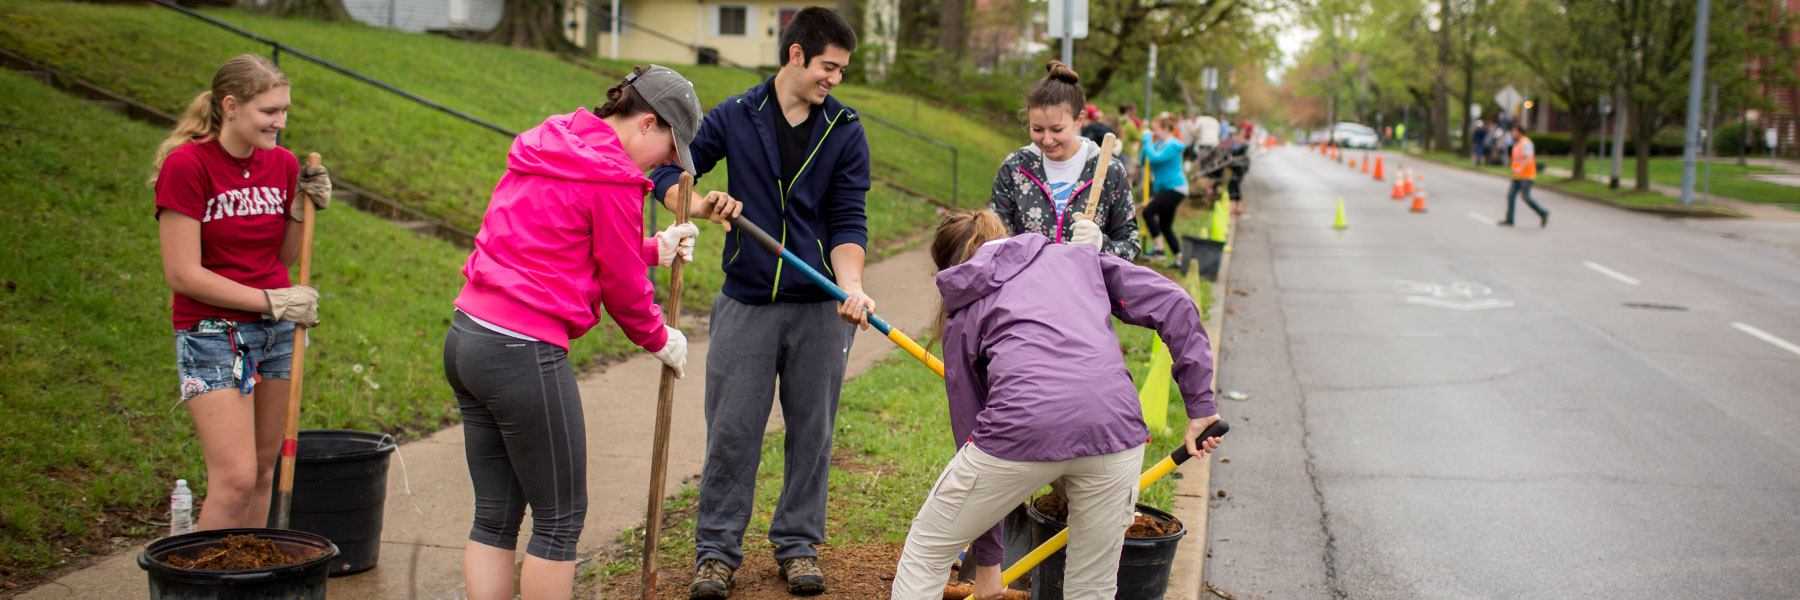 IU students planting trees on Arbor Day along a street.